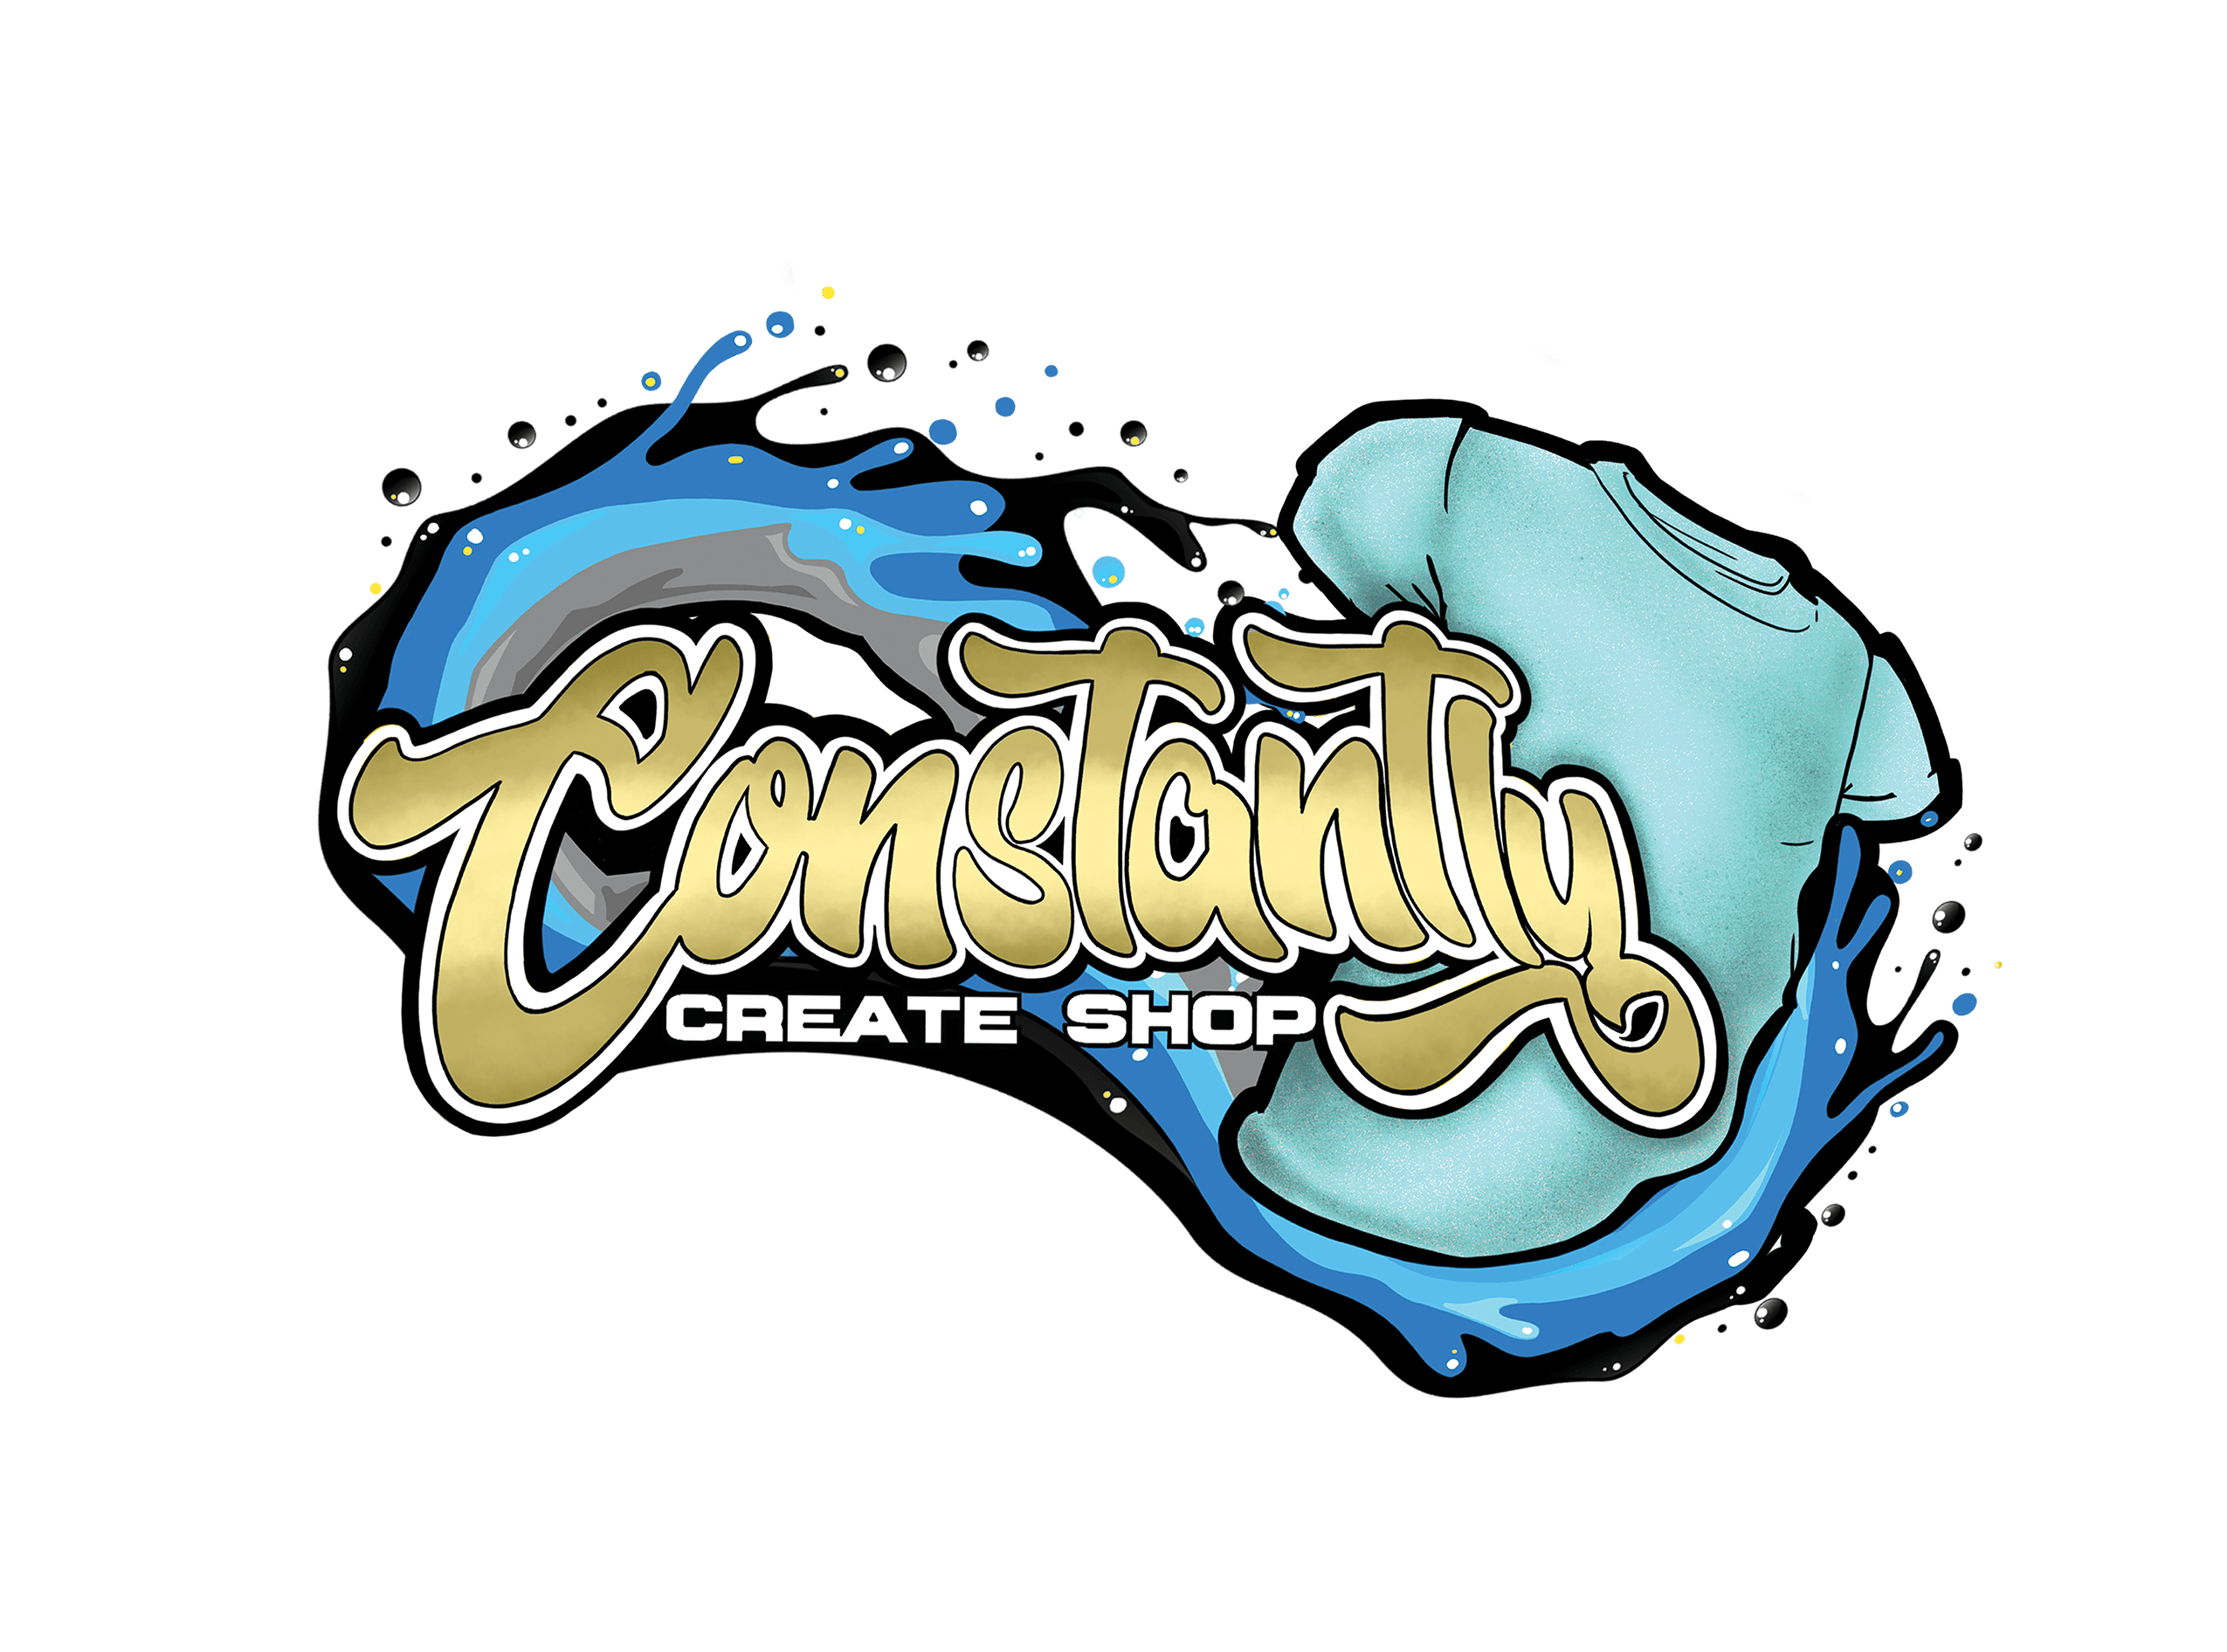 Products – Constantly Create Shop